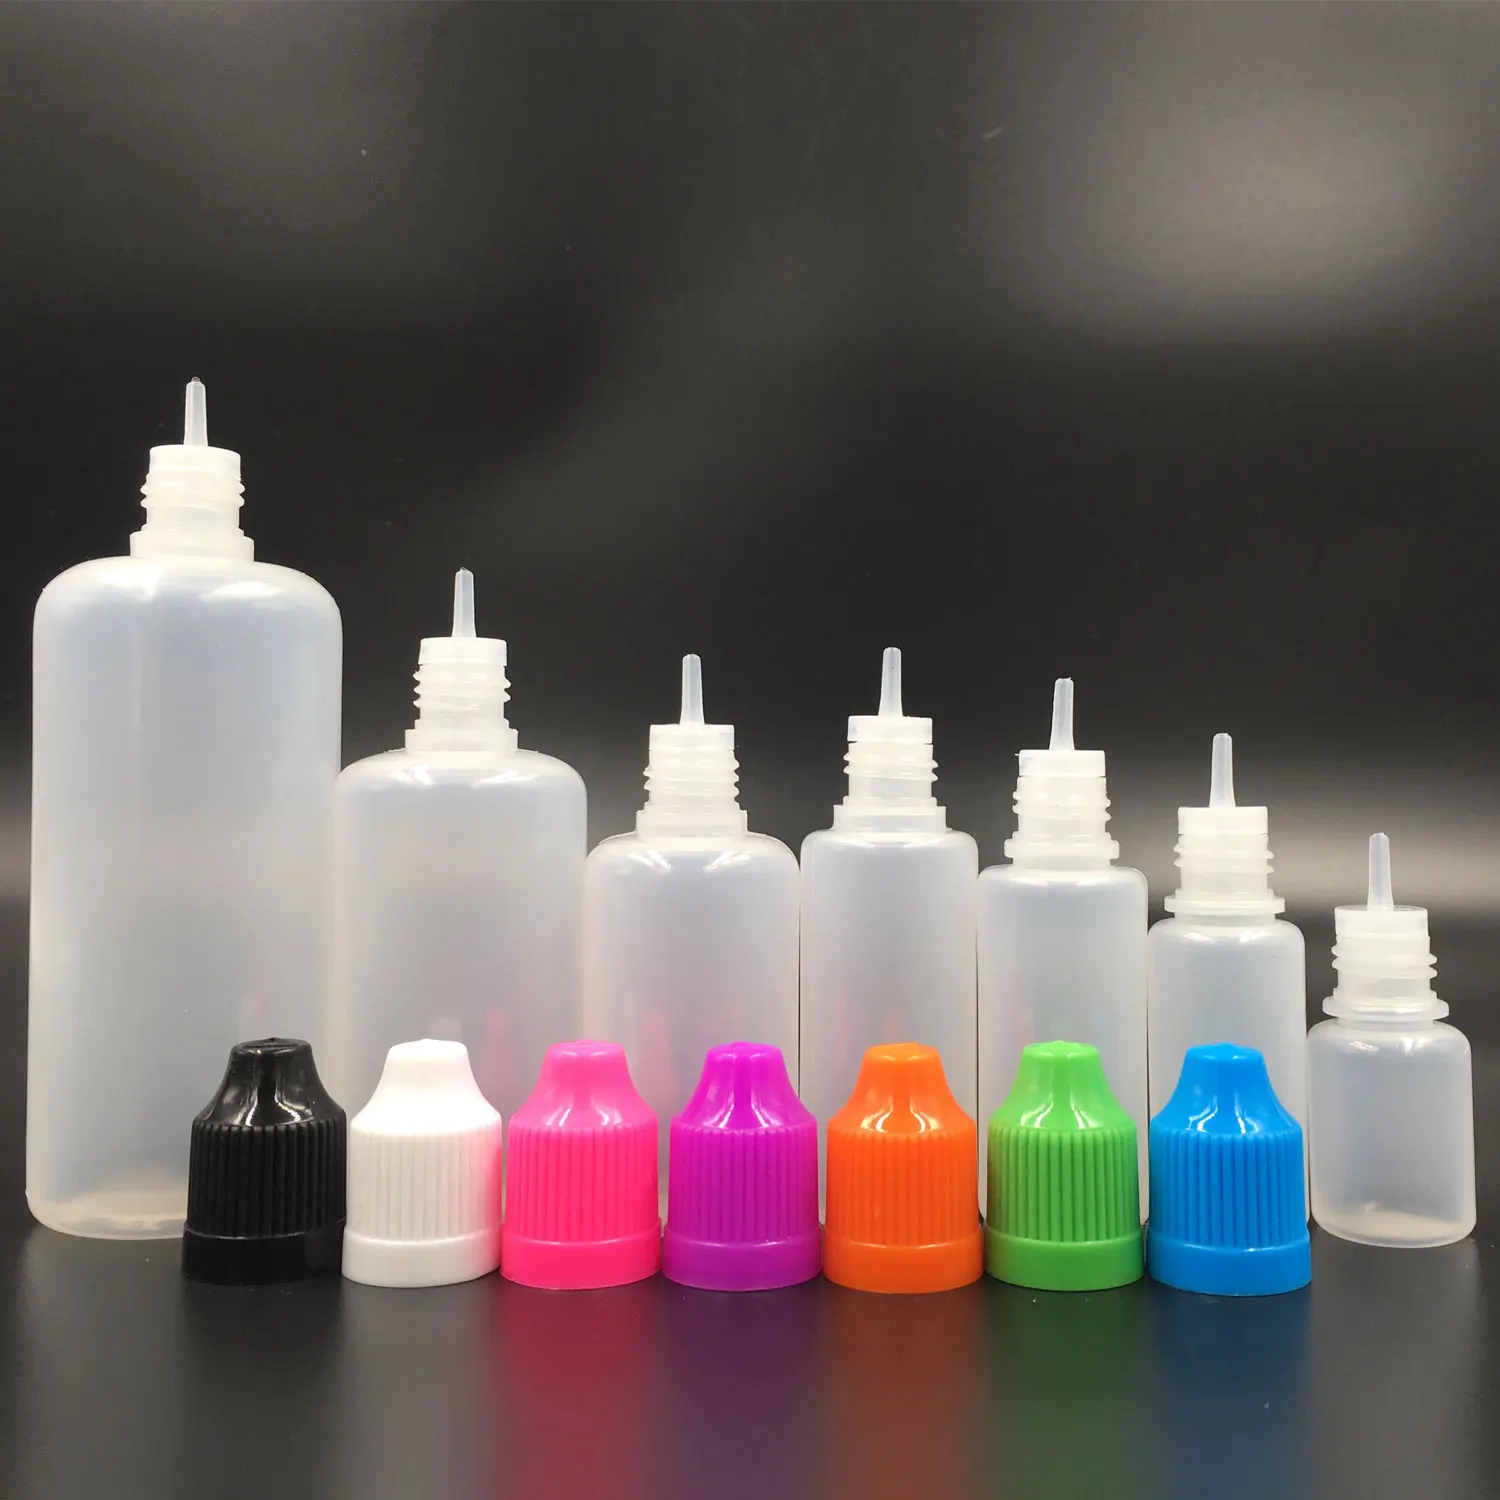 10pcs 5ml-120ml Empty Soft LDPE Dropper Bottles Plastic Containers for E Liquid Vape Bottle with Mixed Caps Lid Plugs mofii candy keyboard mouse combo wireless 2 4g mixed color 84 key mini keyboard mouse set with circular punk key caps pink